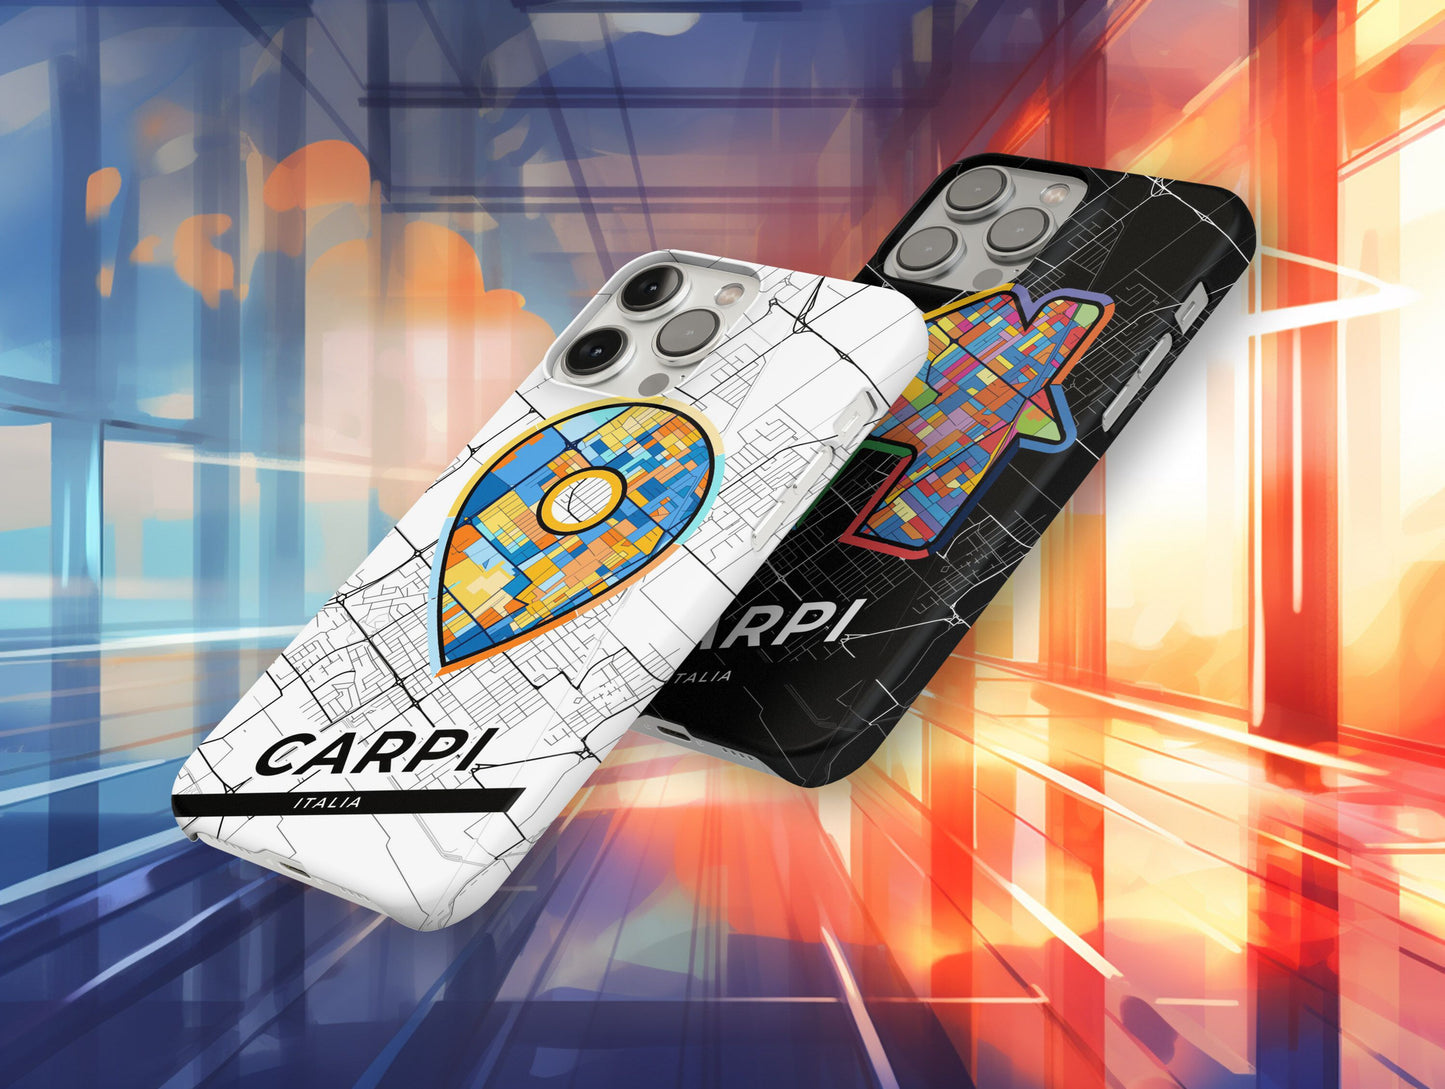 Carpi Italy slim phone case with colorful icon. Birthday, wedding or housewarming gift. Couple match cases.